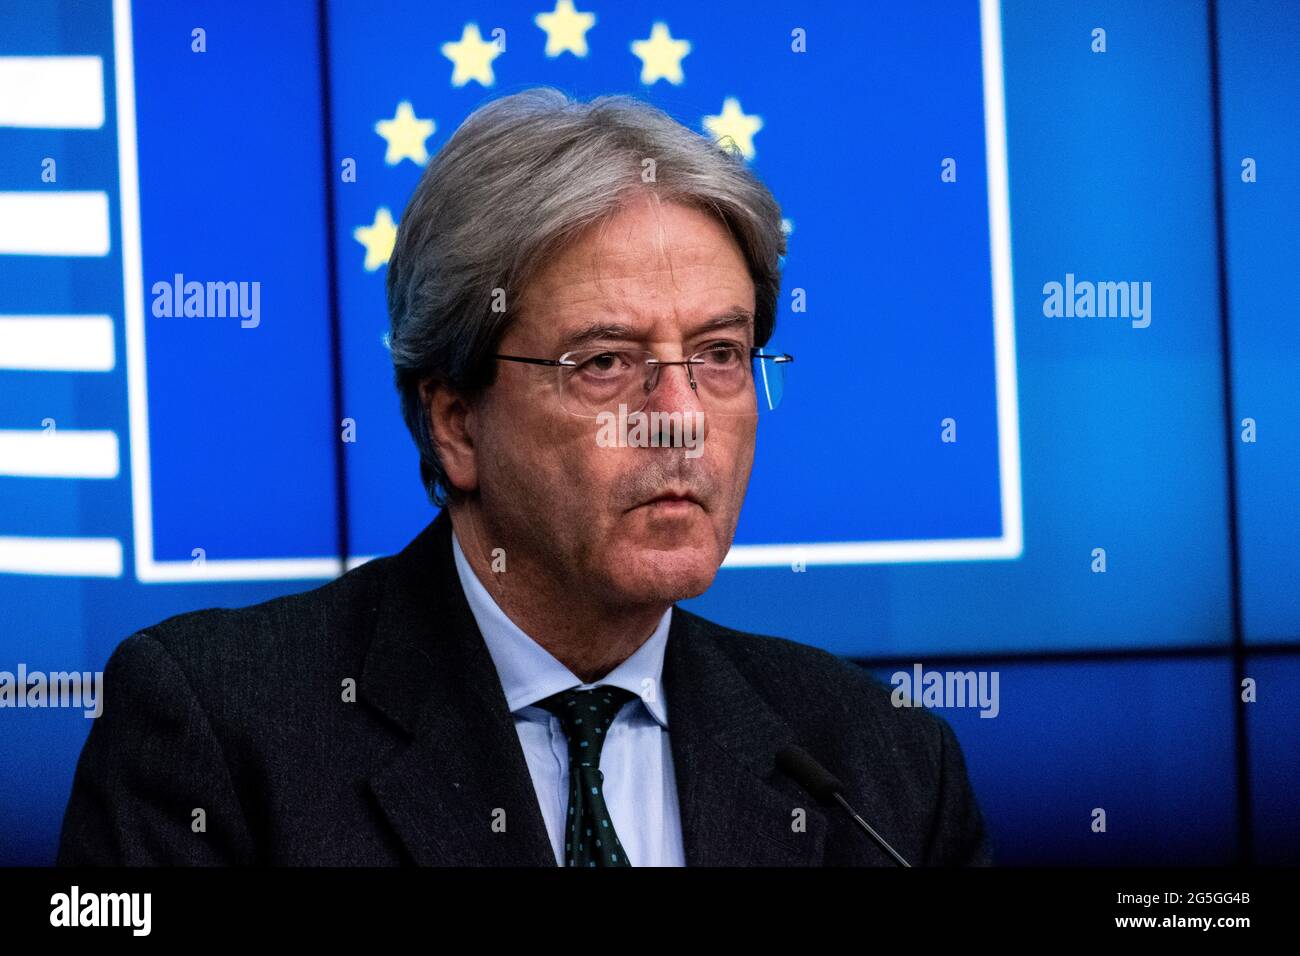 Portrait of European Commissioner for economy and former Prime Minister of Italy, Paolo Gentiloni. Brussels. Belgium. Stock Photo